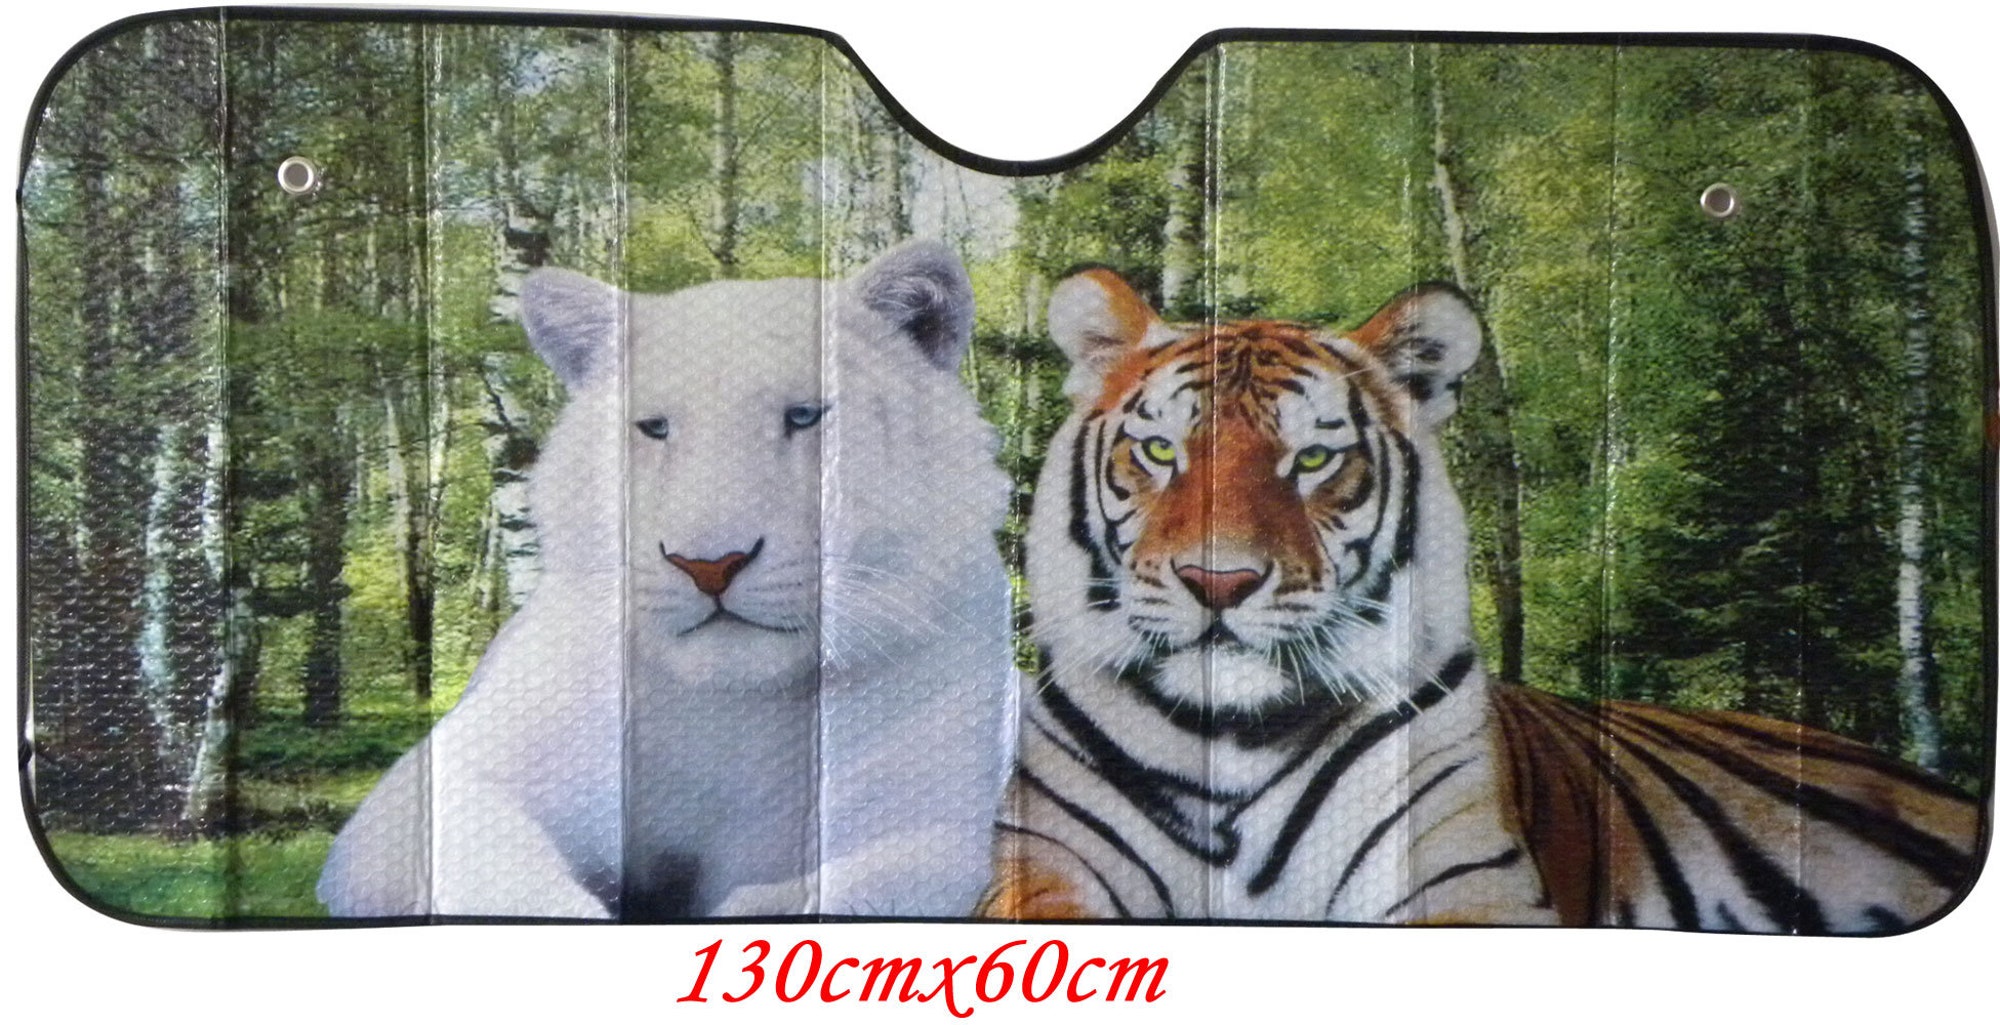 Discover Car window sunshade  with a cool white tiger